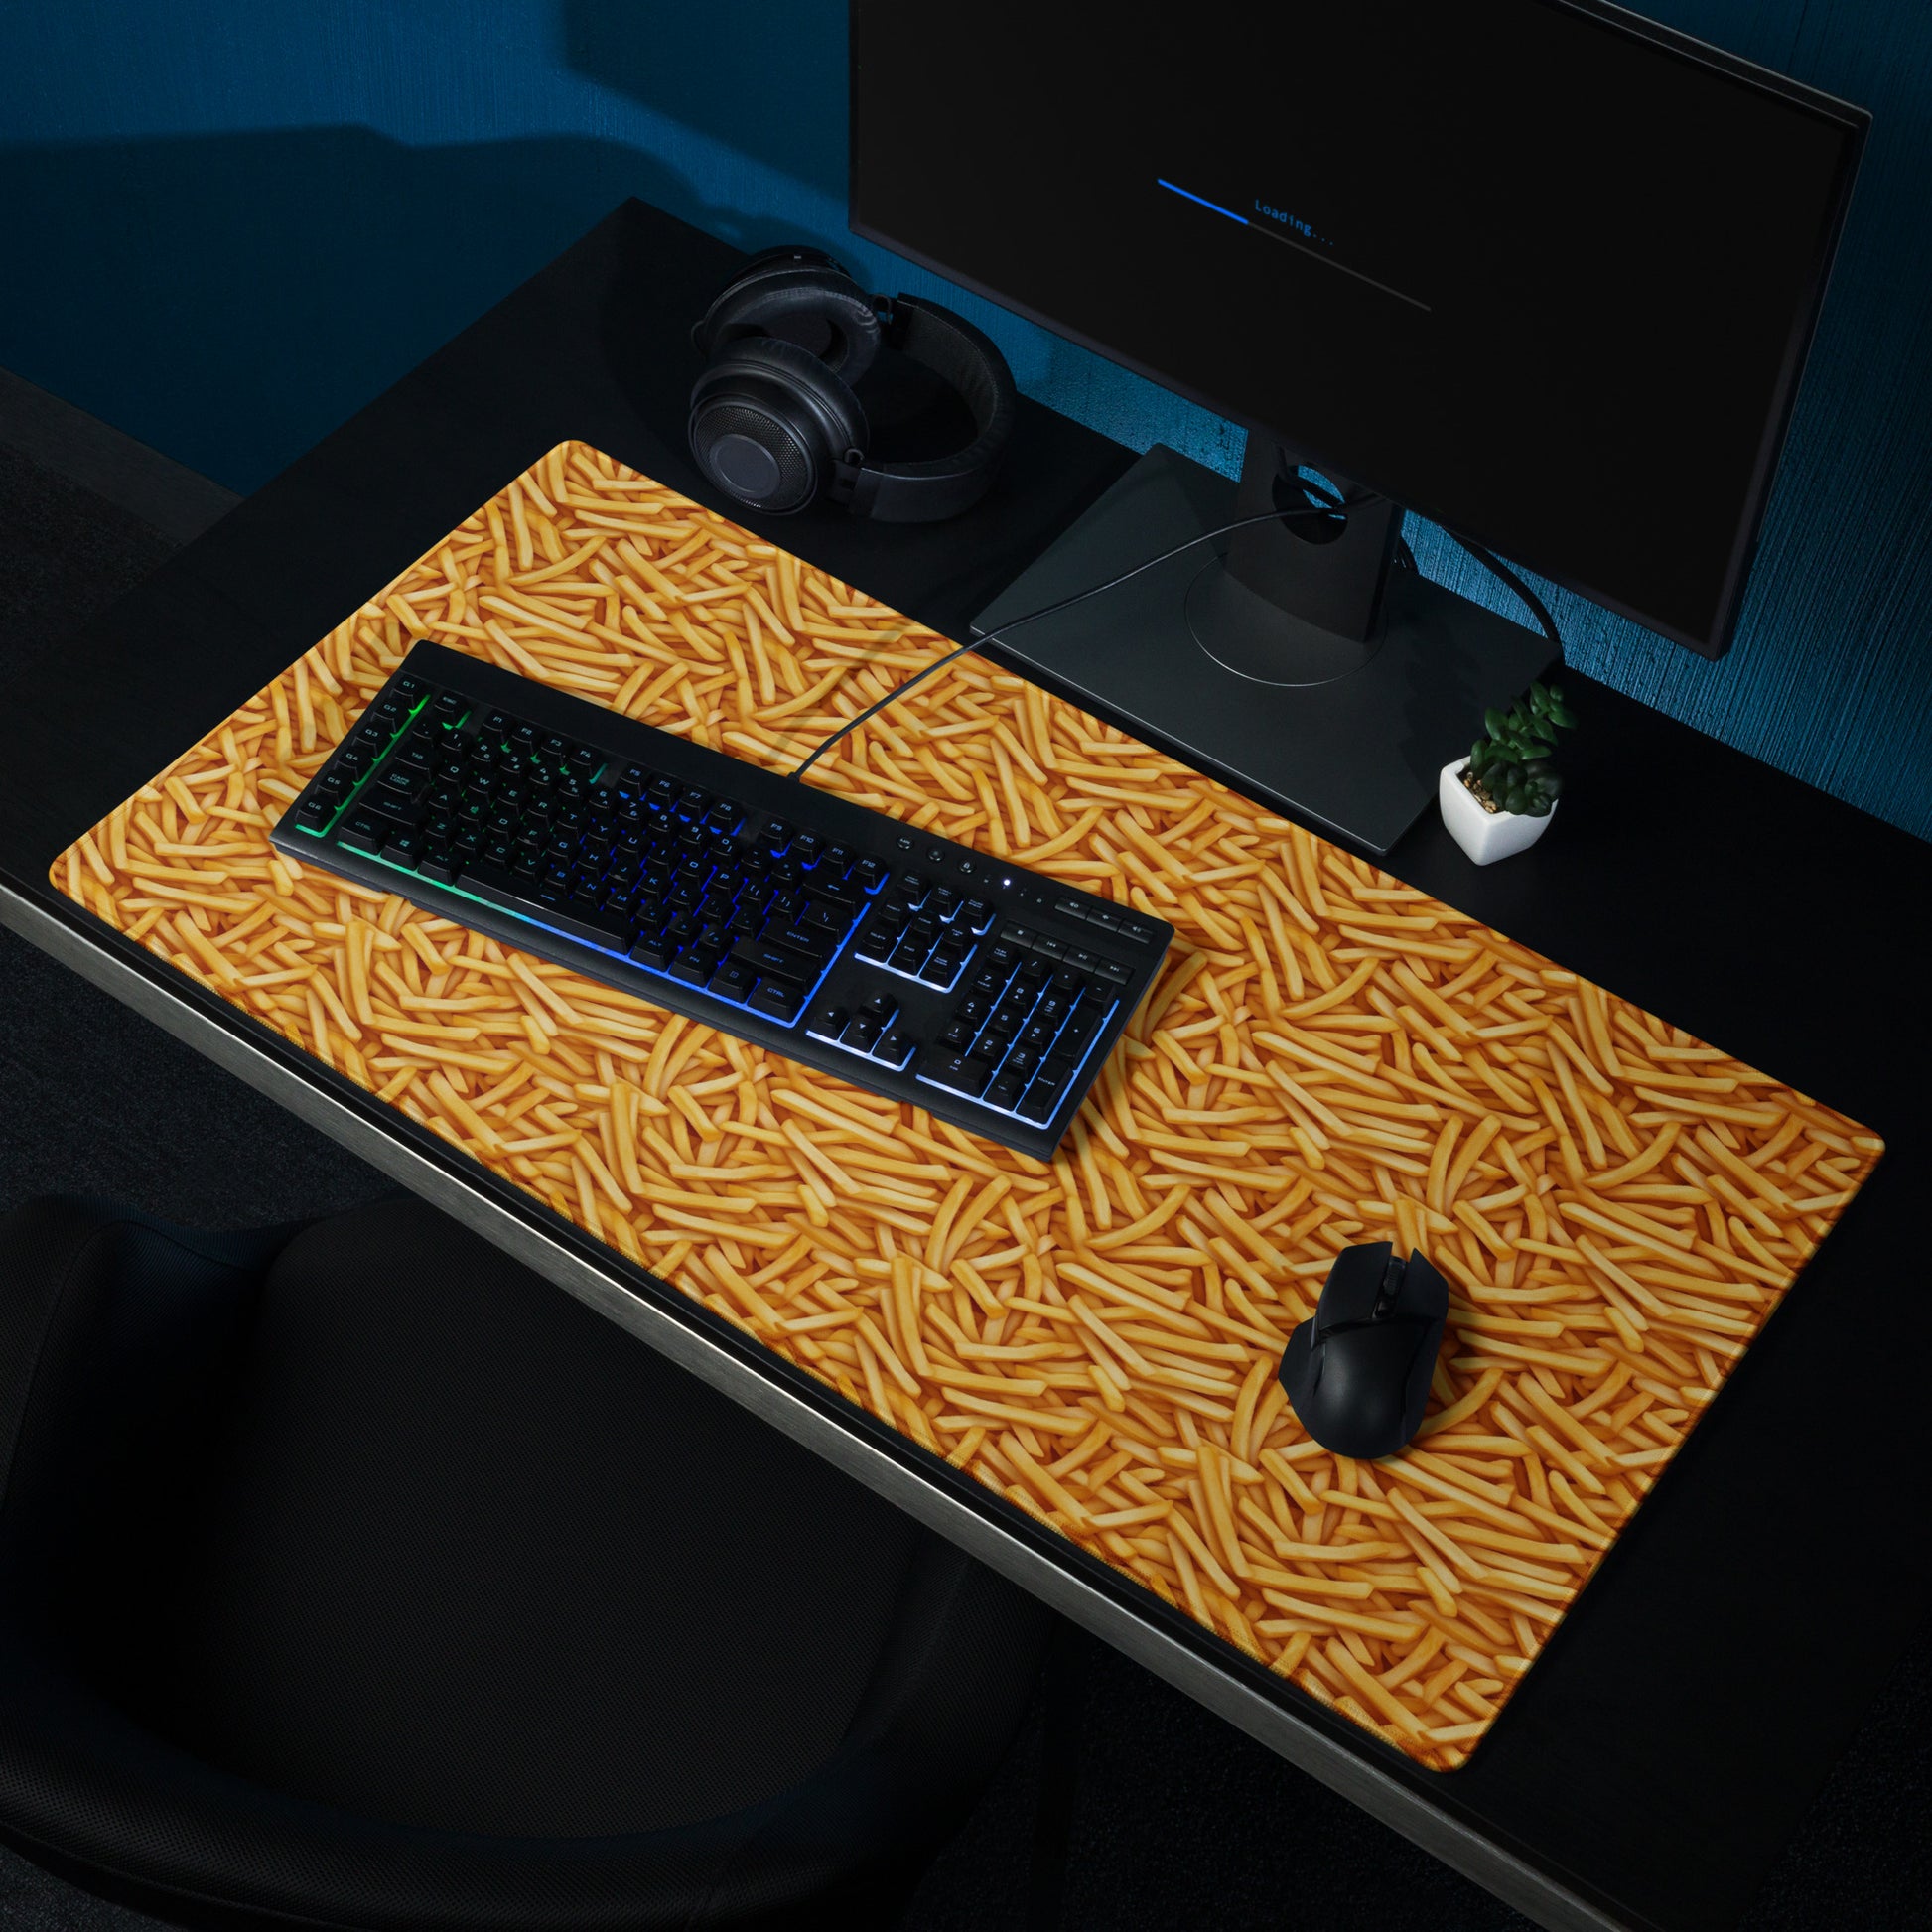 A 36" x 18" desk pad with a bunch of french fries all over it shown at a desk setup. Yellow in color.